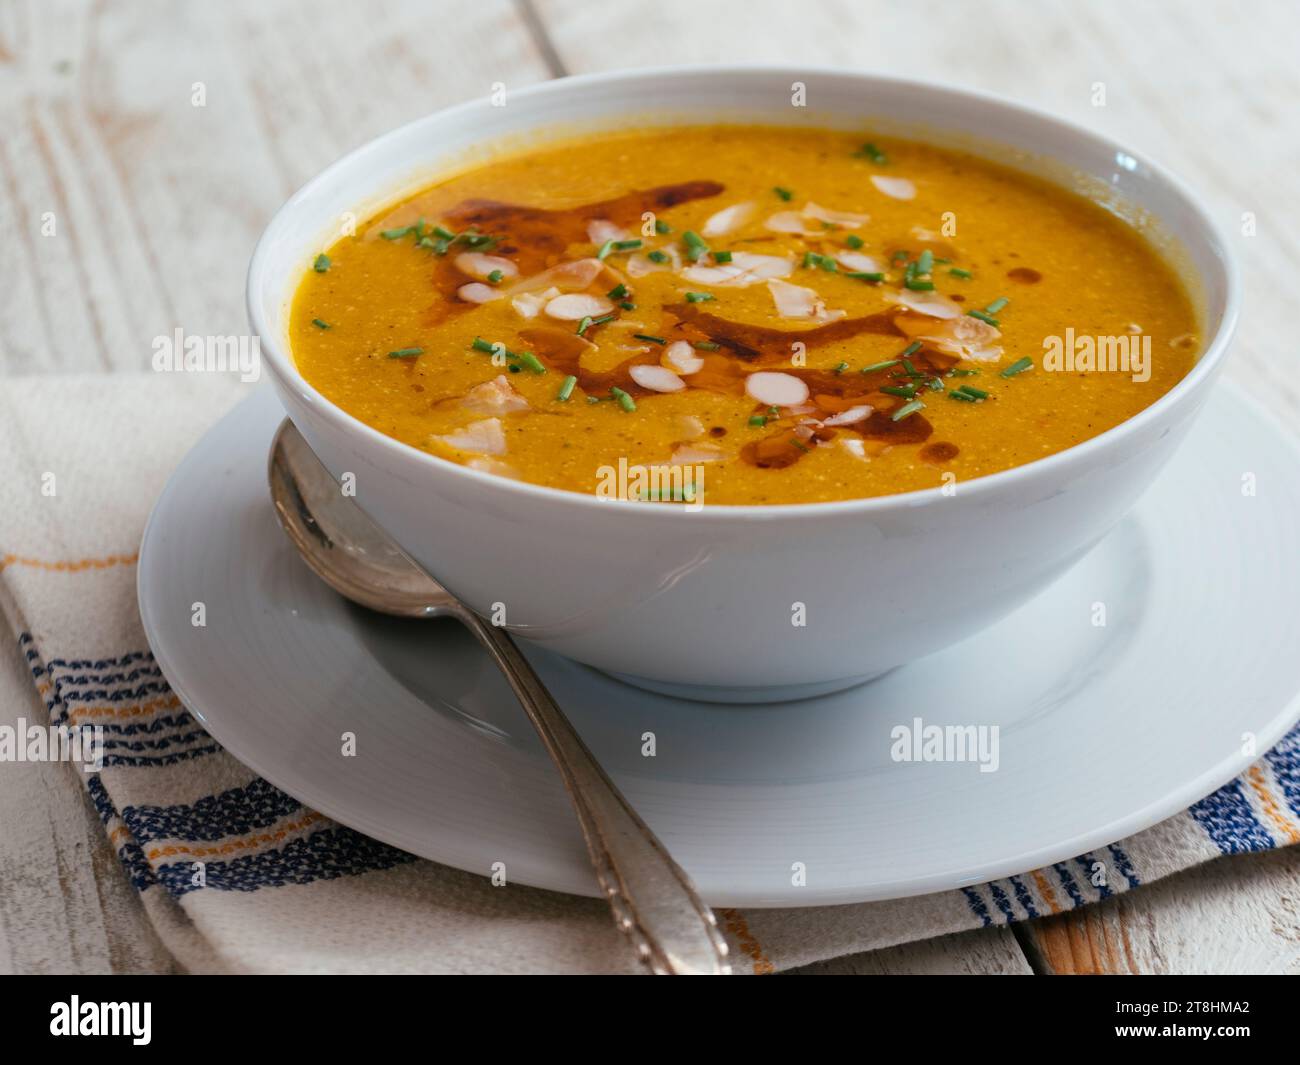 Bowl with a home made Almond, Winter Squash Bisque. Stock Photo